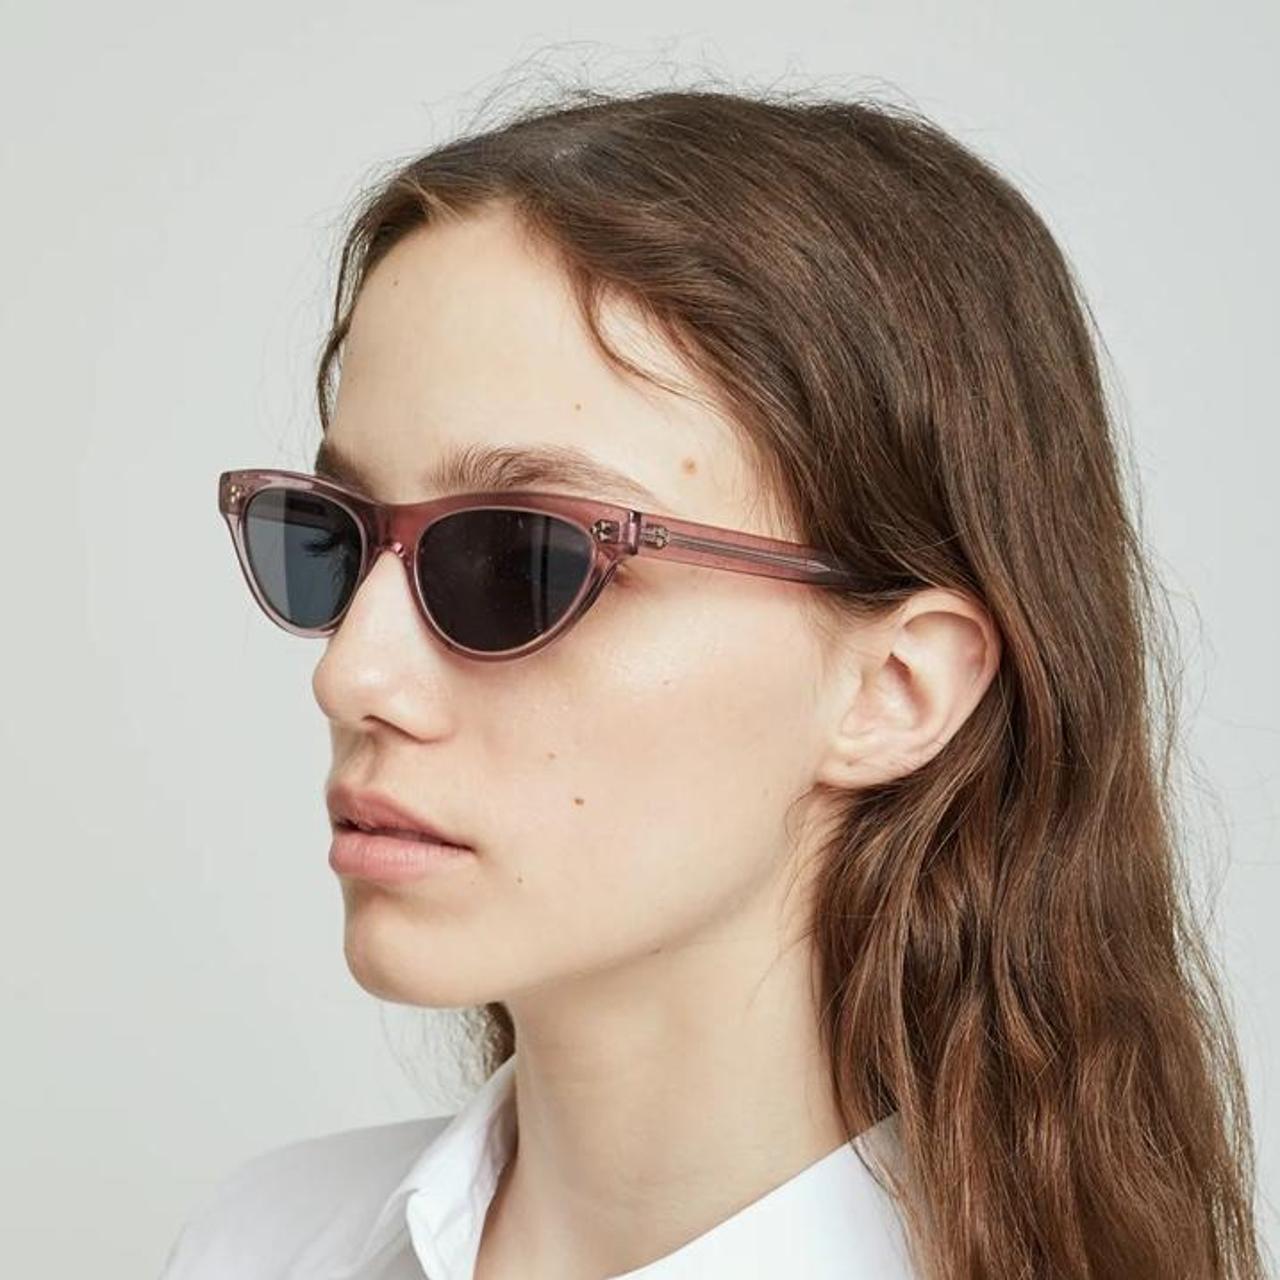 Oliver Peoples Women's Pink and Purple Sunglasses